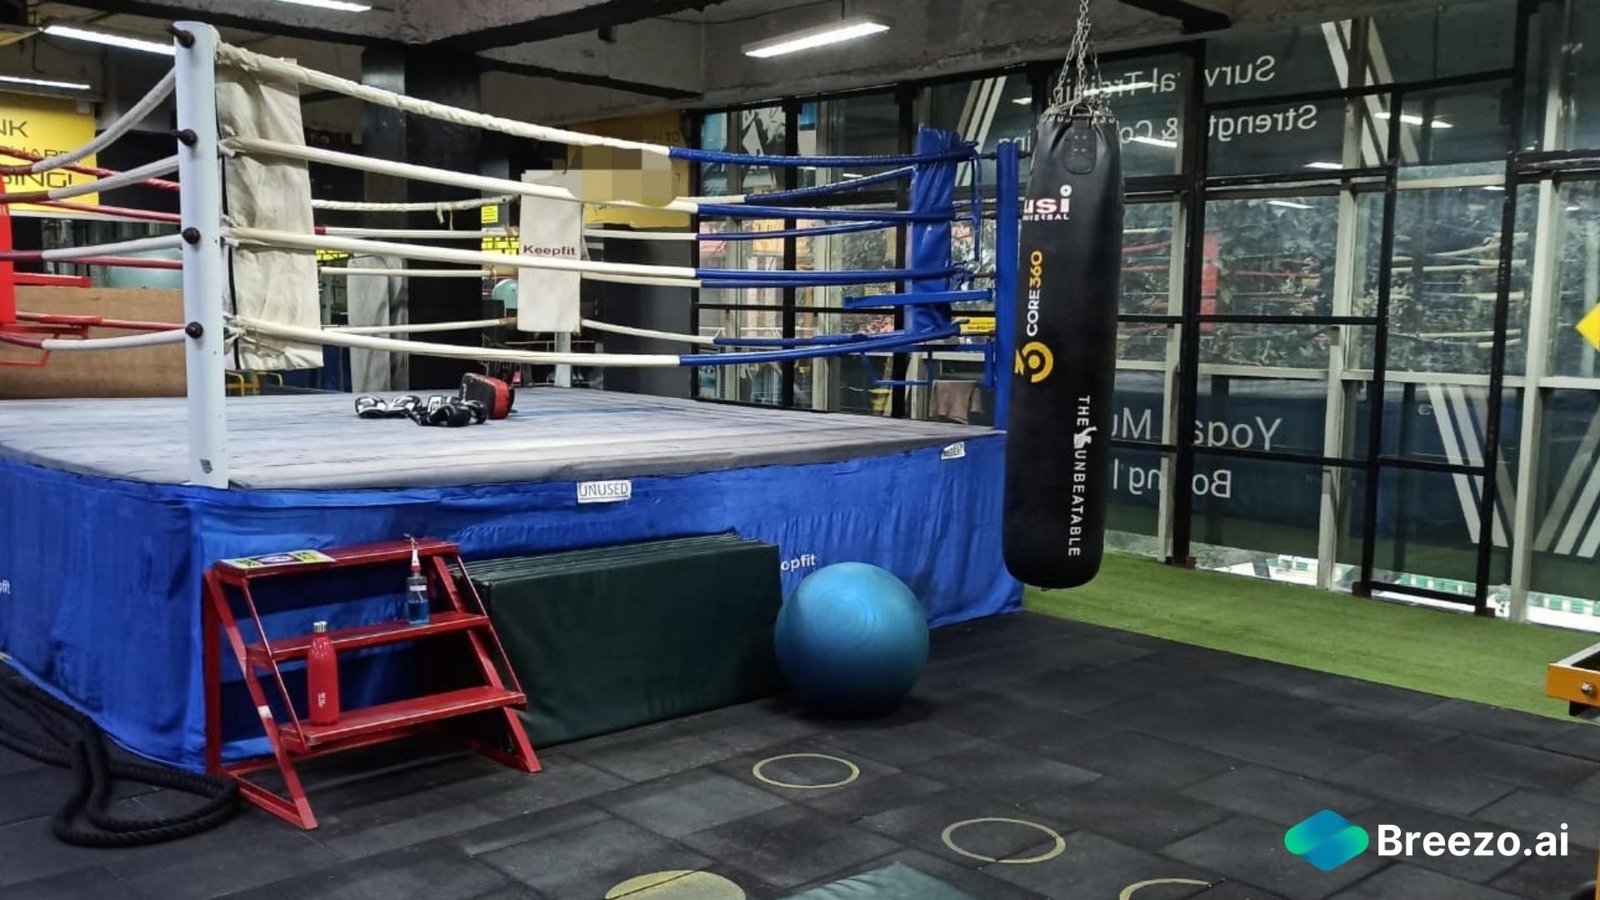 Do most boxing gyms look like this? : r/martialarts